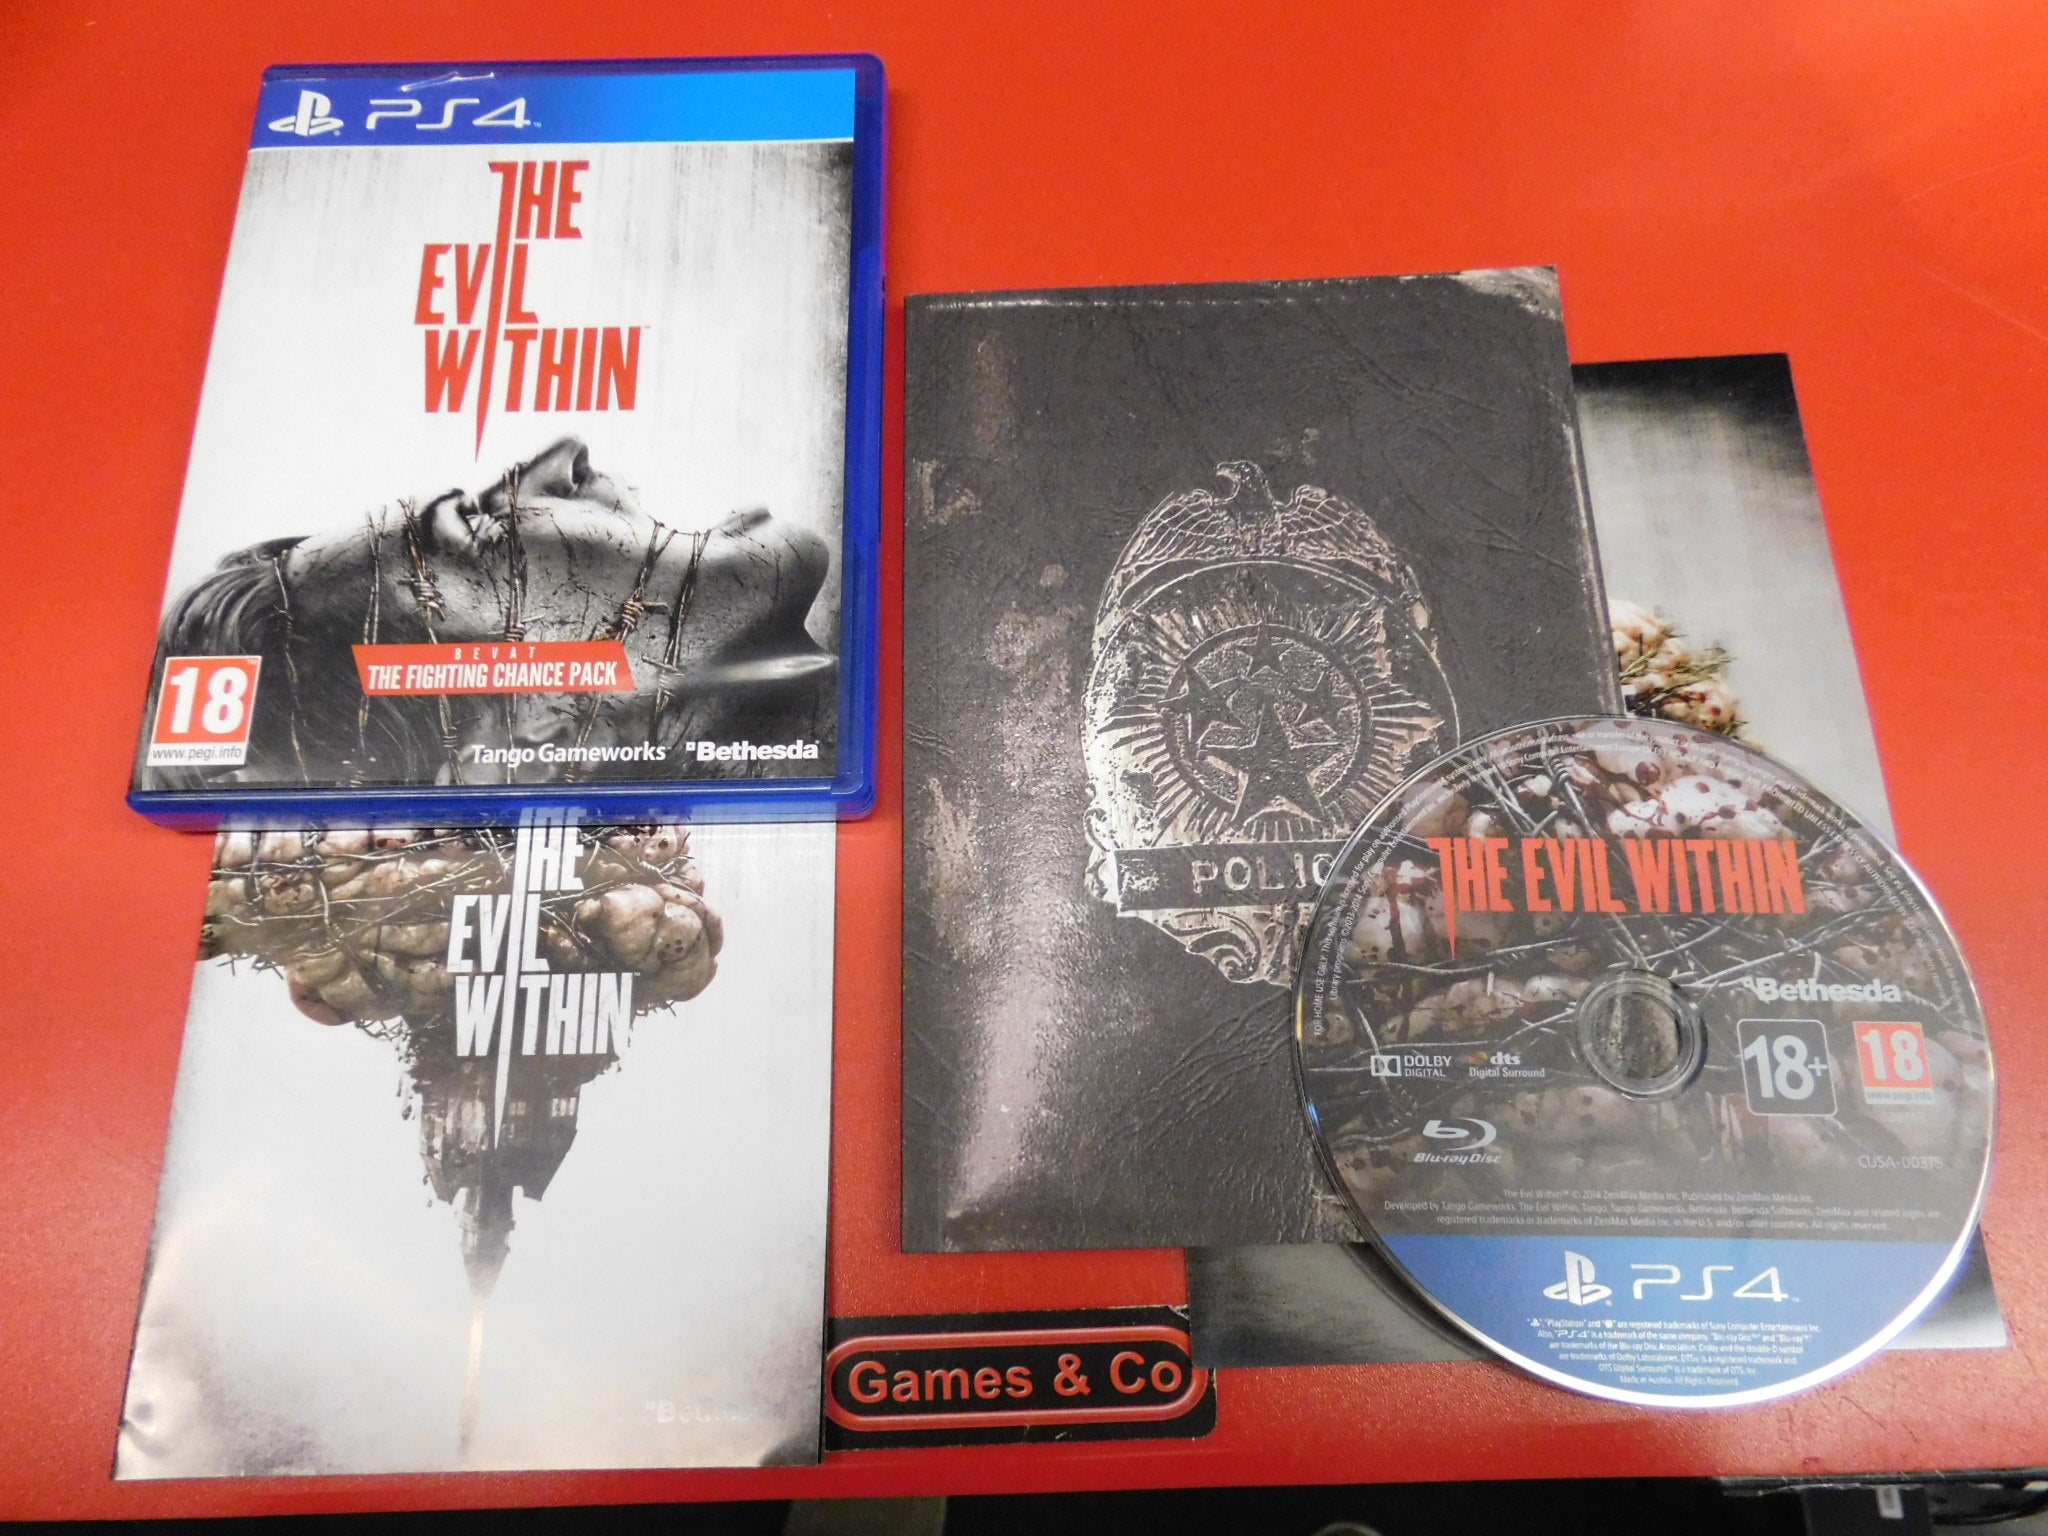 THE EVIL WITHIN LIMITED EDITION